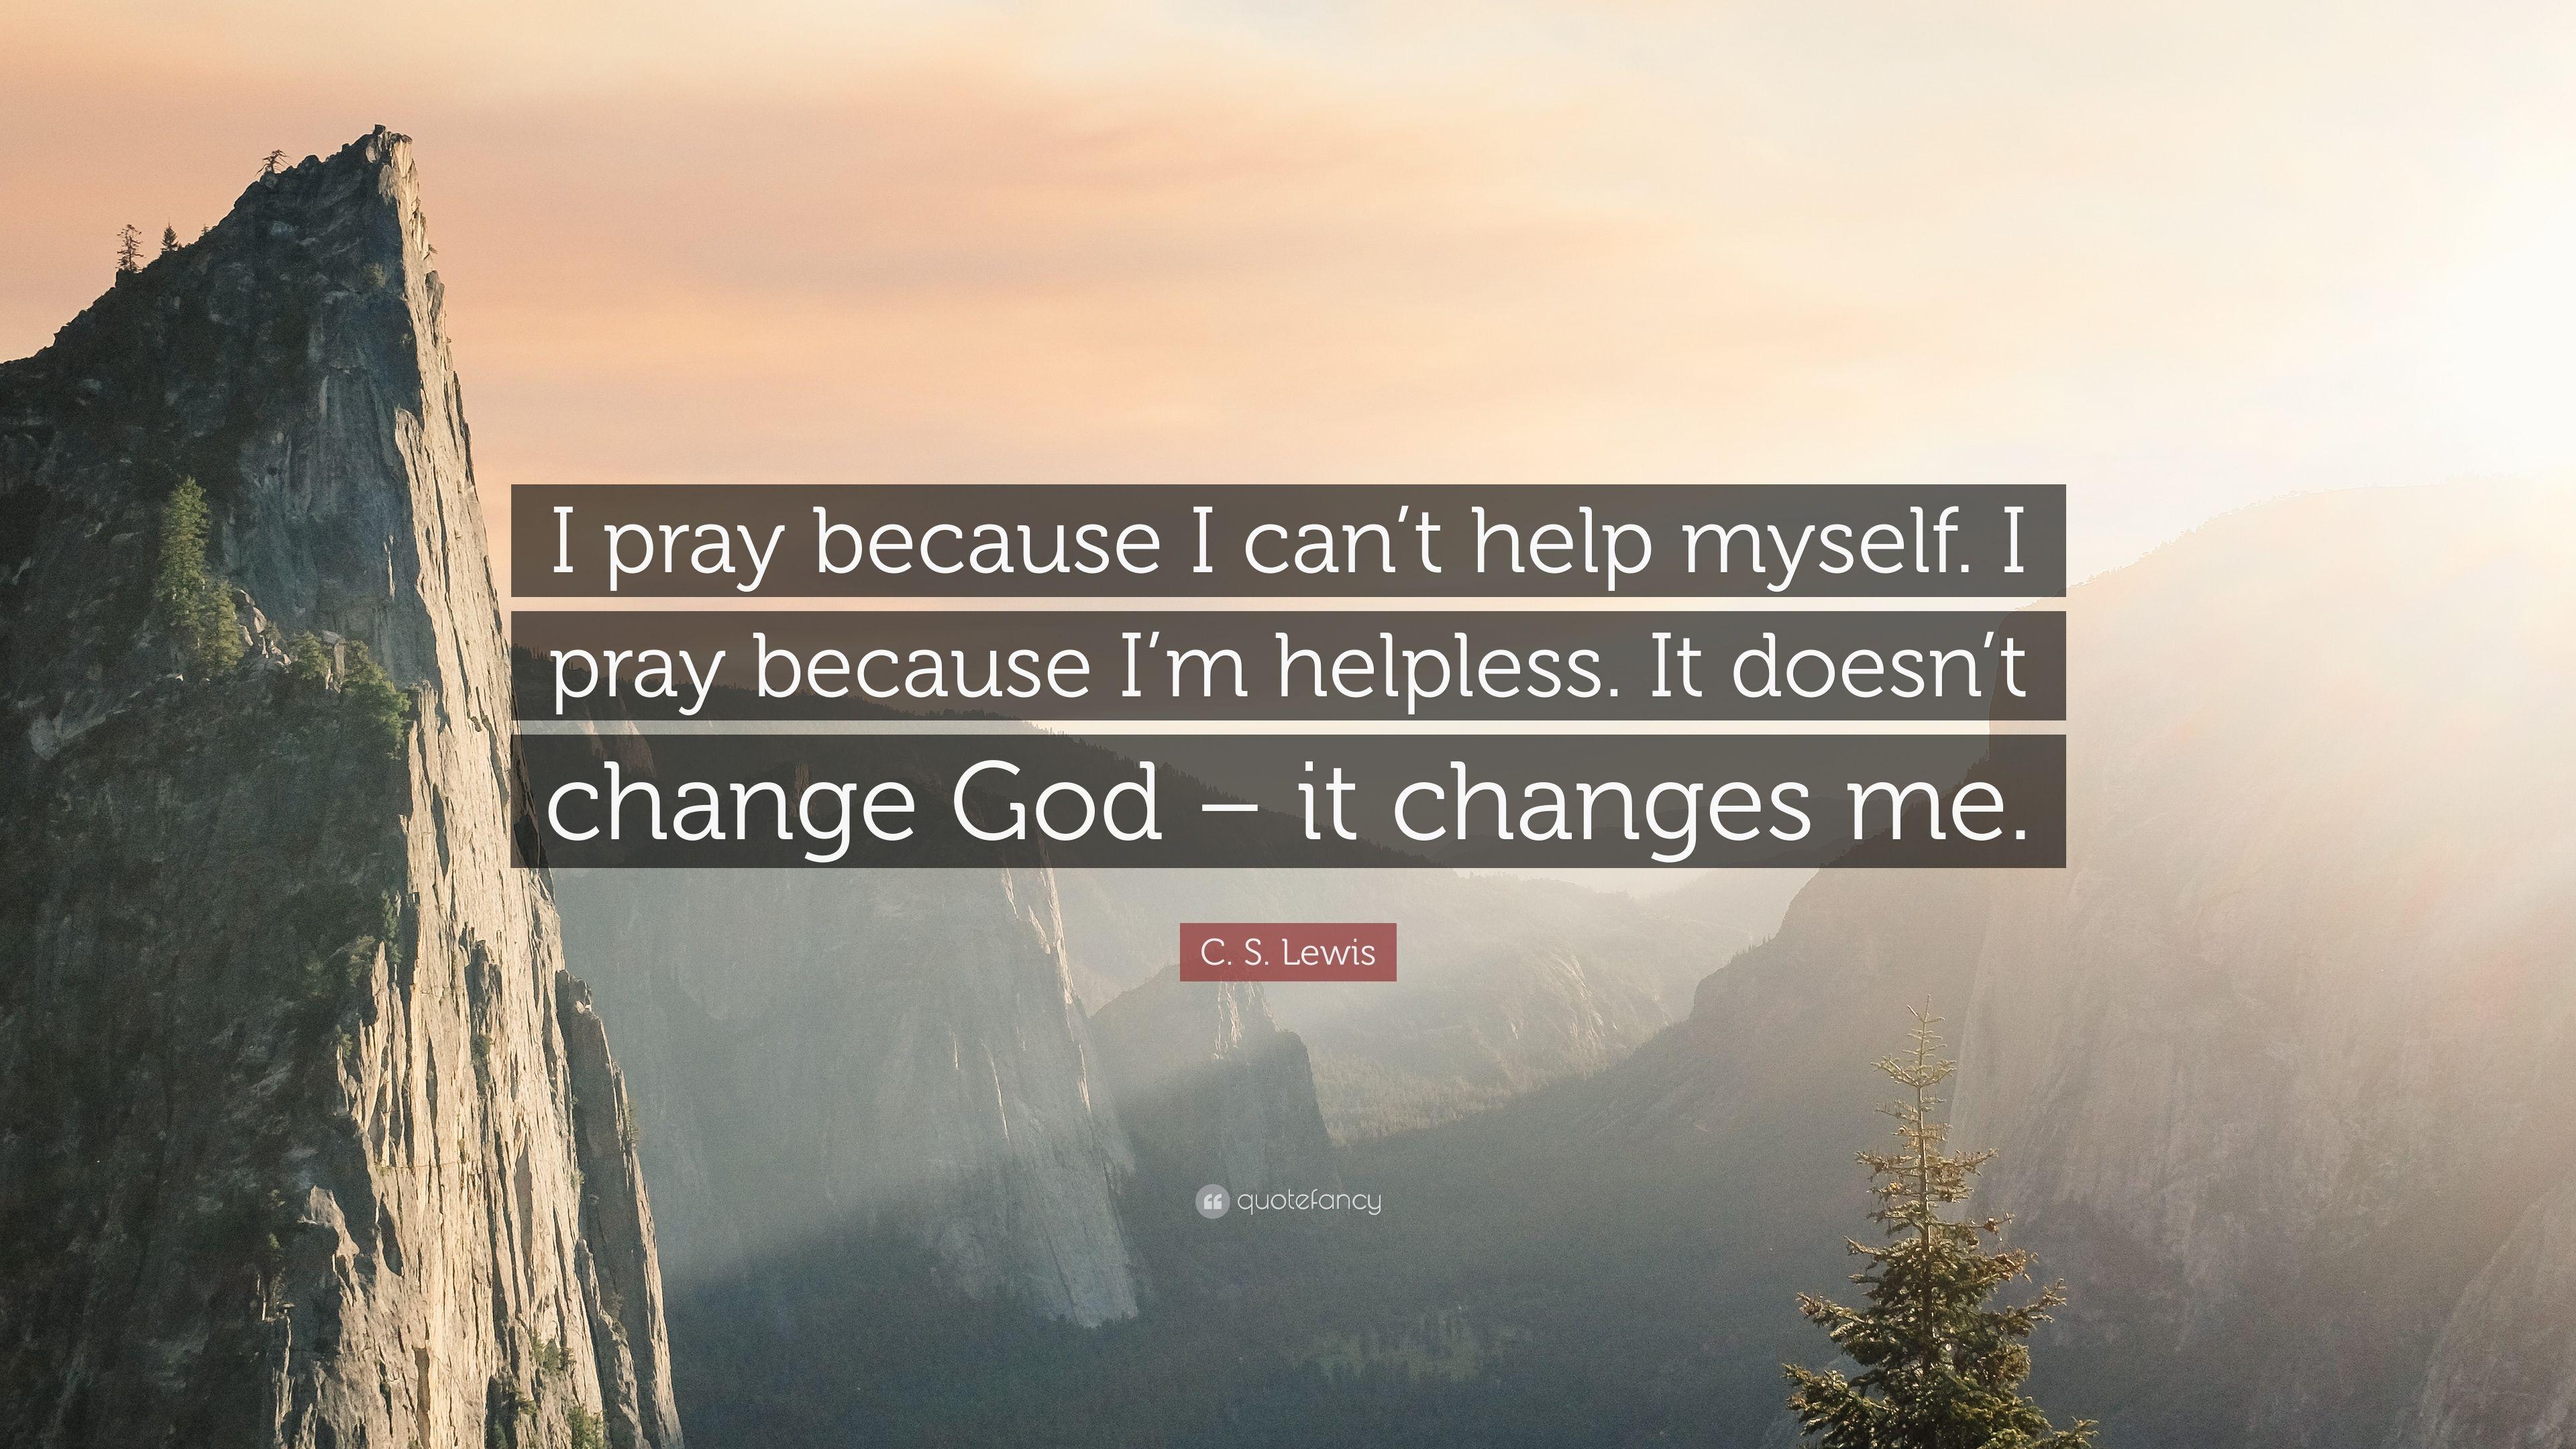 C. S. Lewis Quote: “I pray because I can't help myself. I pray